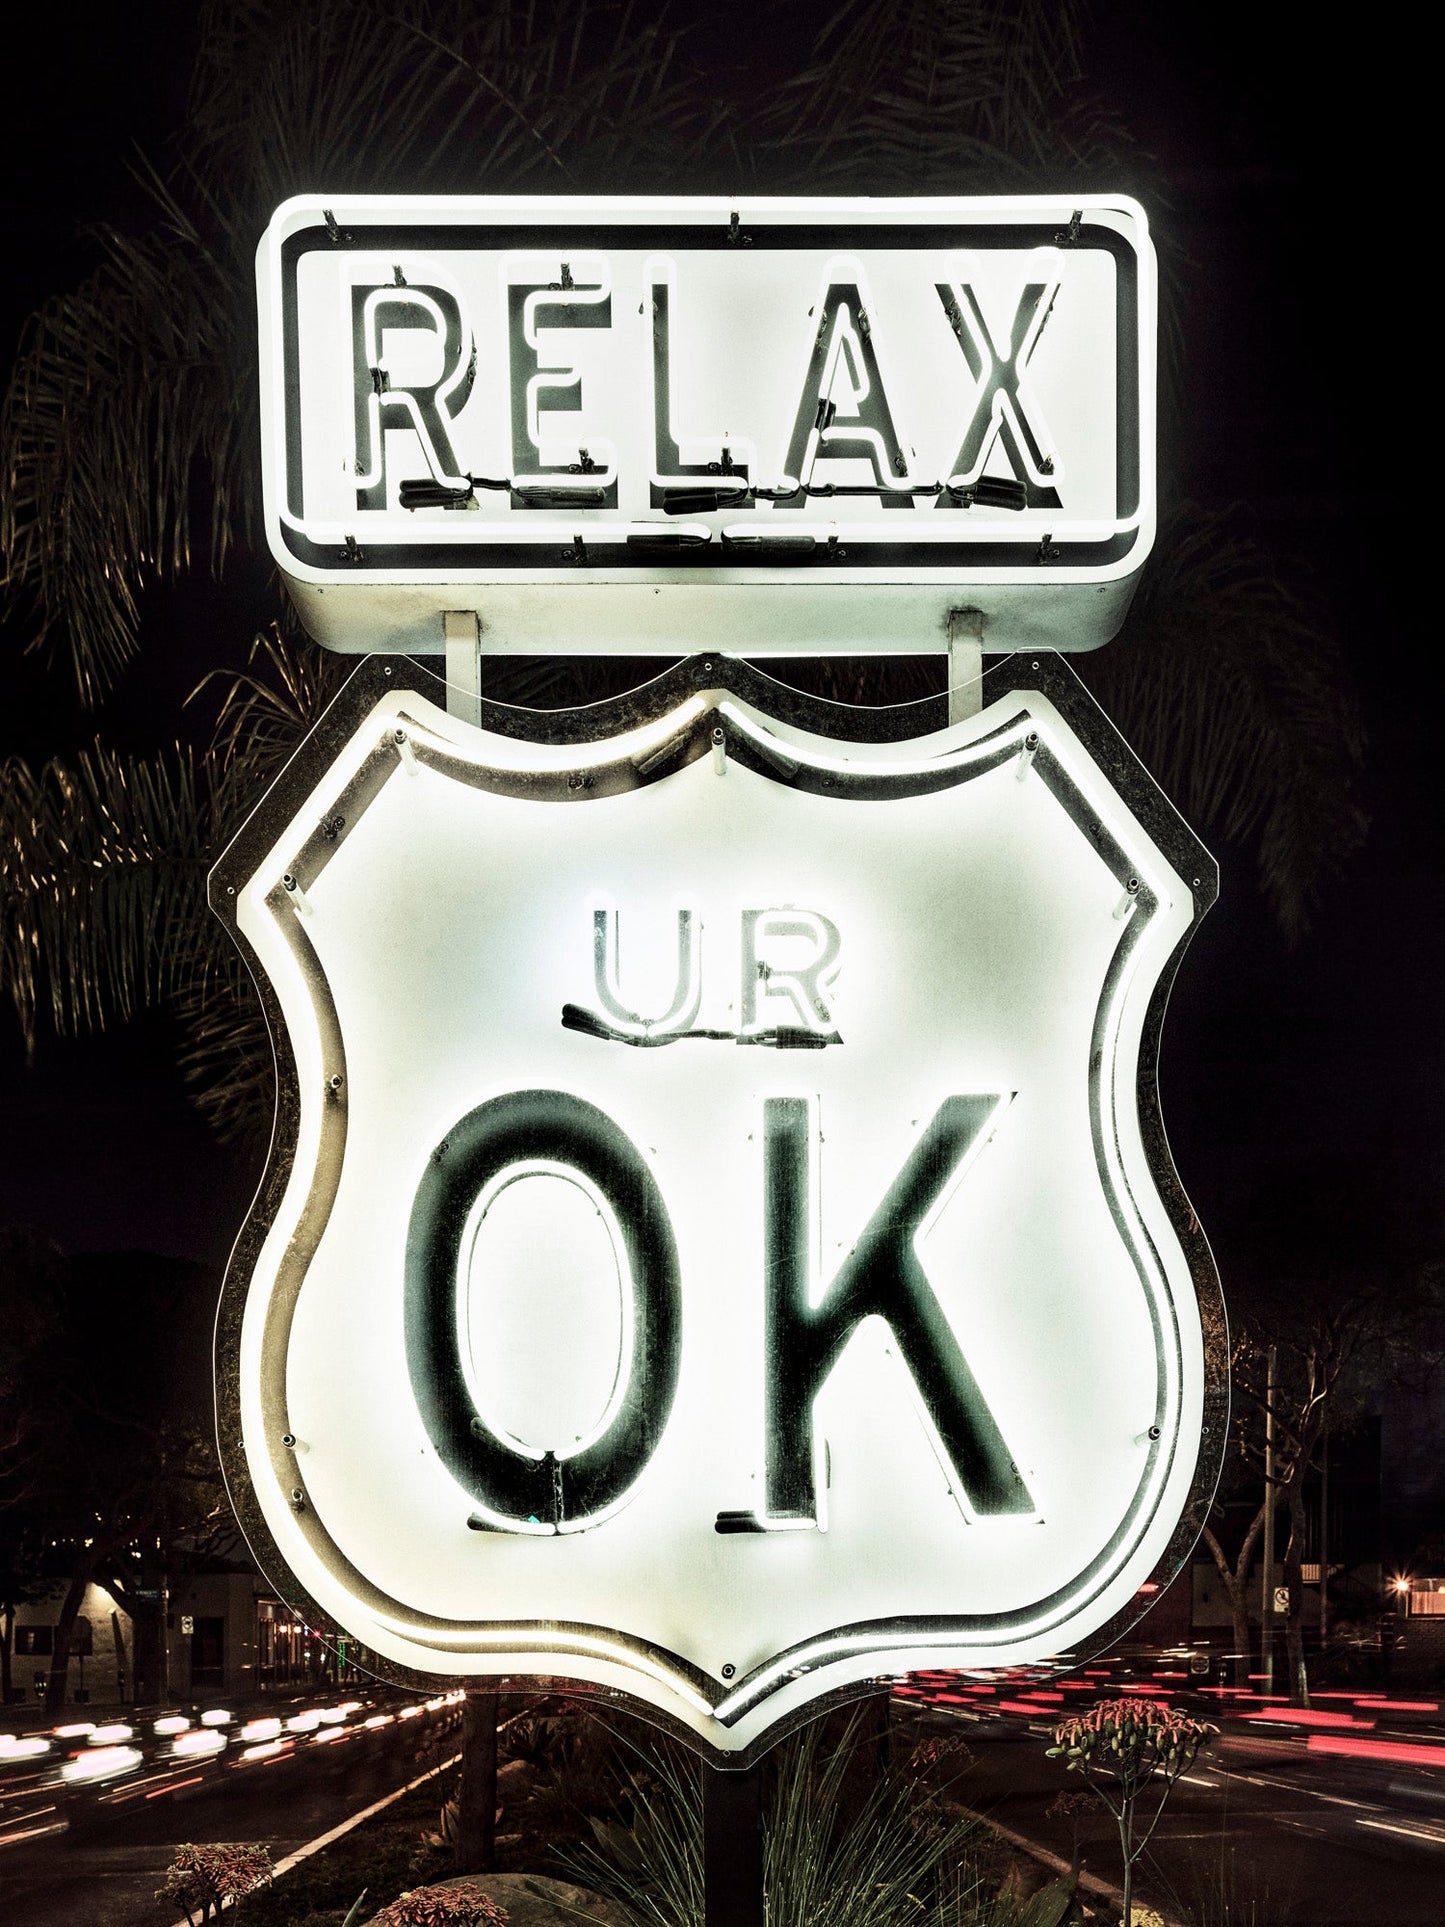 Relax - Los Angeles